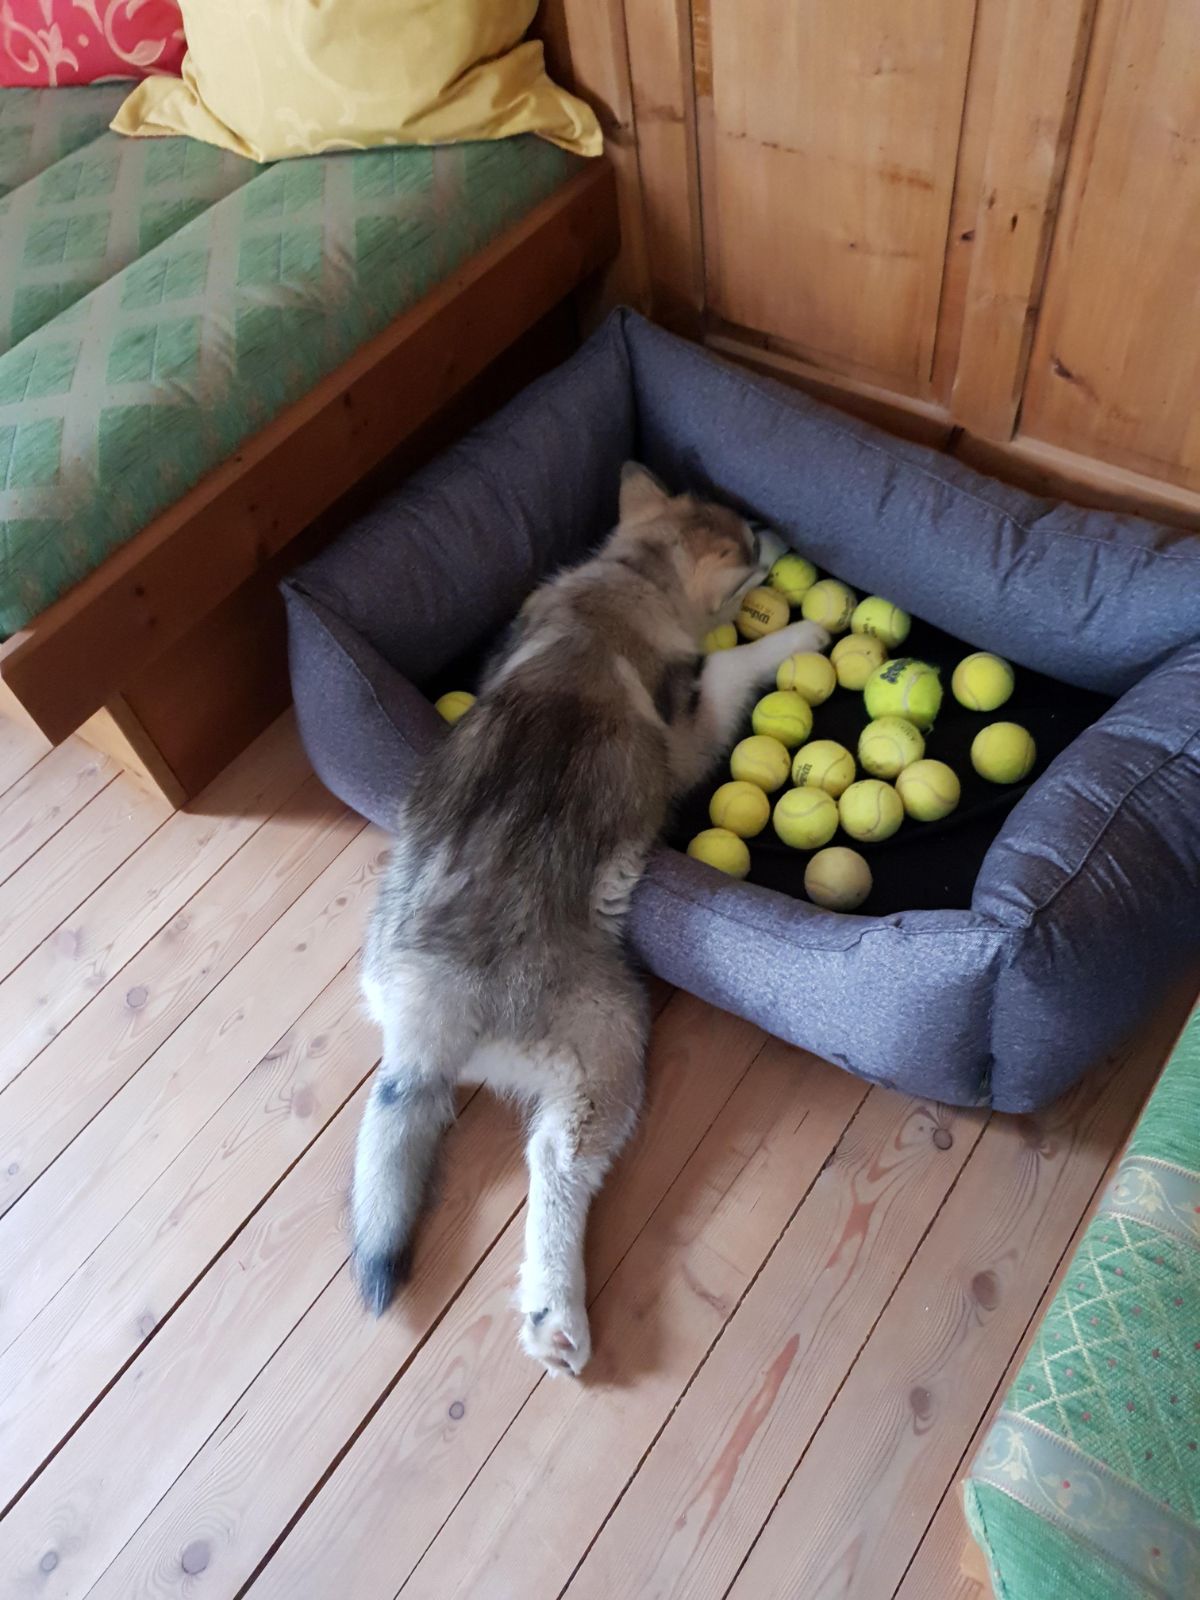 black and white puppy sleeping on a blue dog bed filled with a bunch of yellow tennis balls